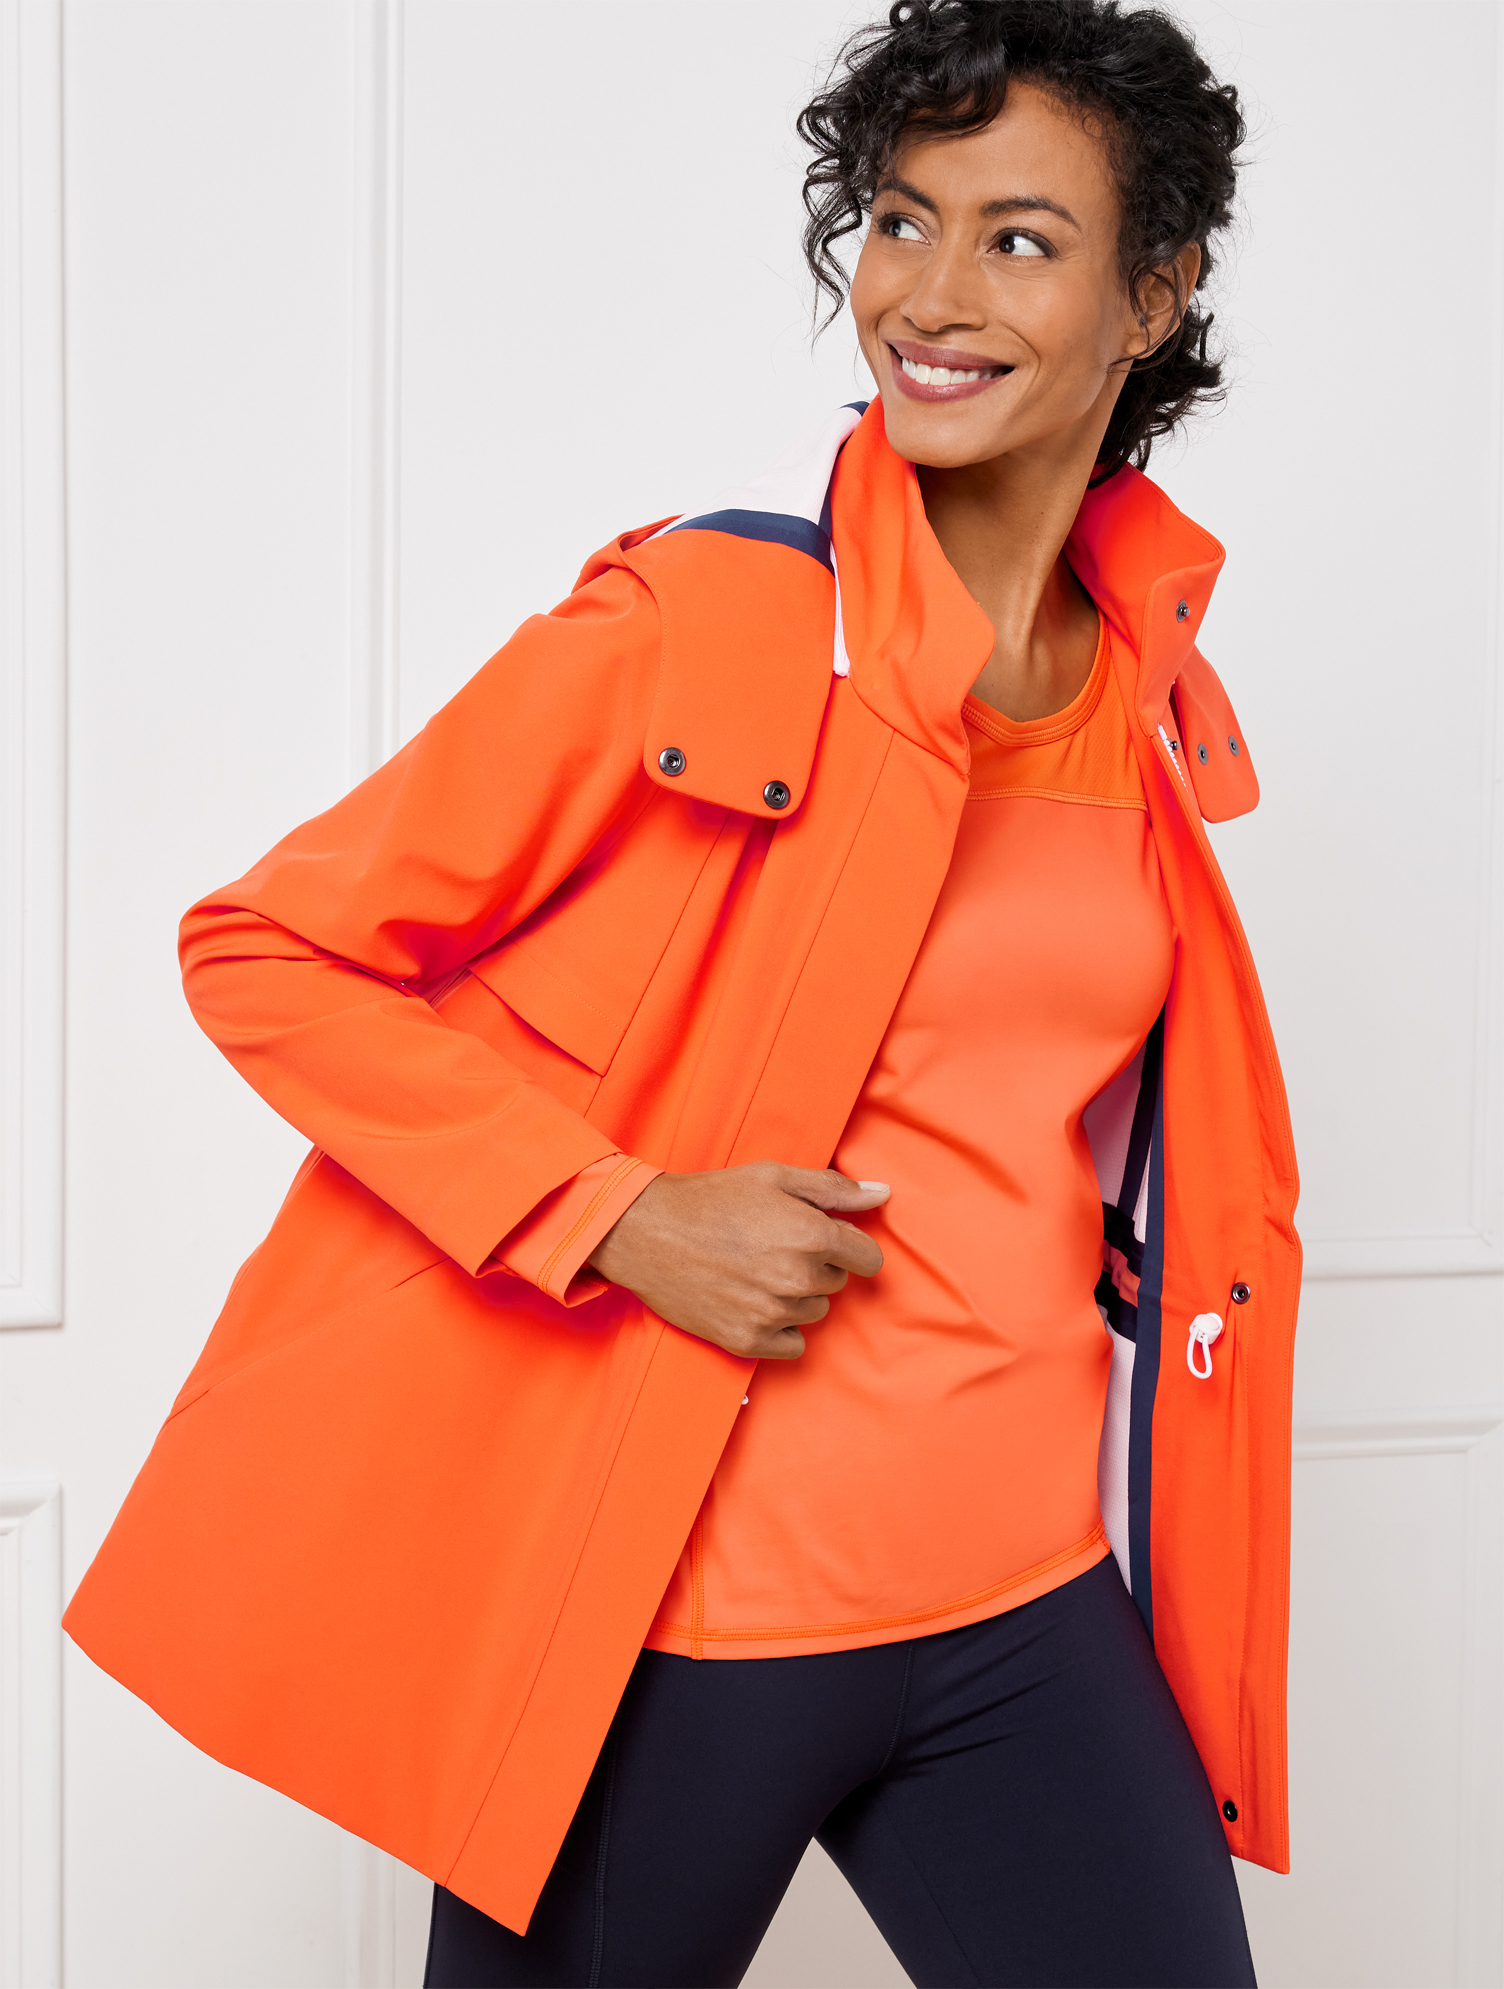 Talbots Hooded Water-resistant Jacket - Bright Tangerine - Bright Tangerine/white - Medium  In Bright Tangerine,white